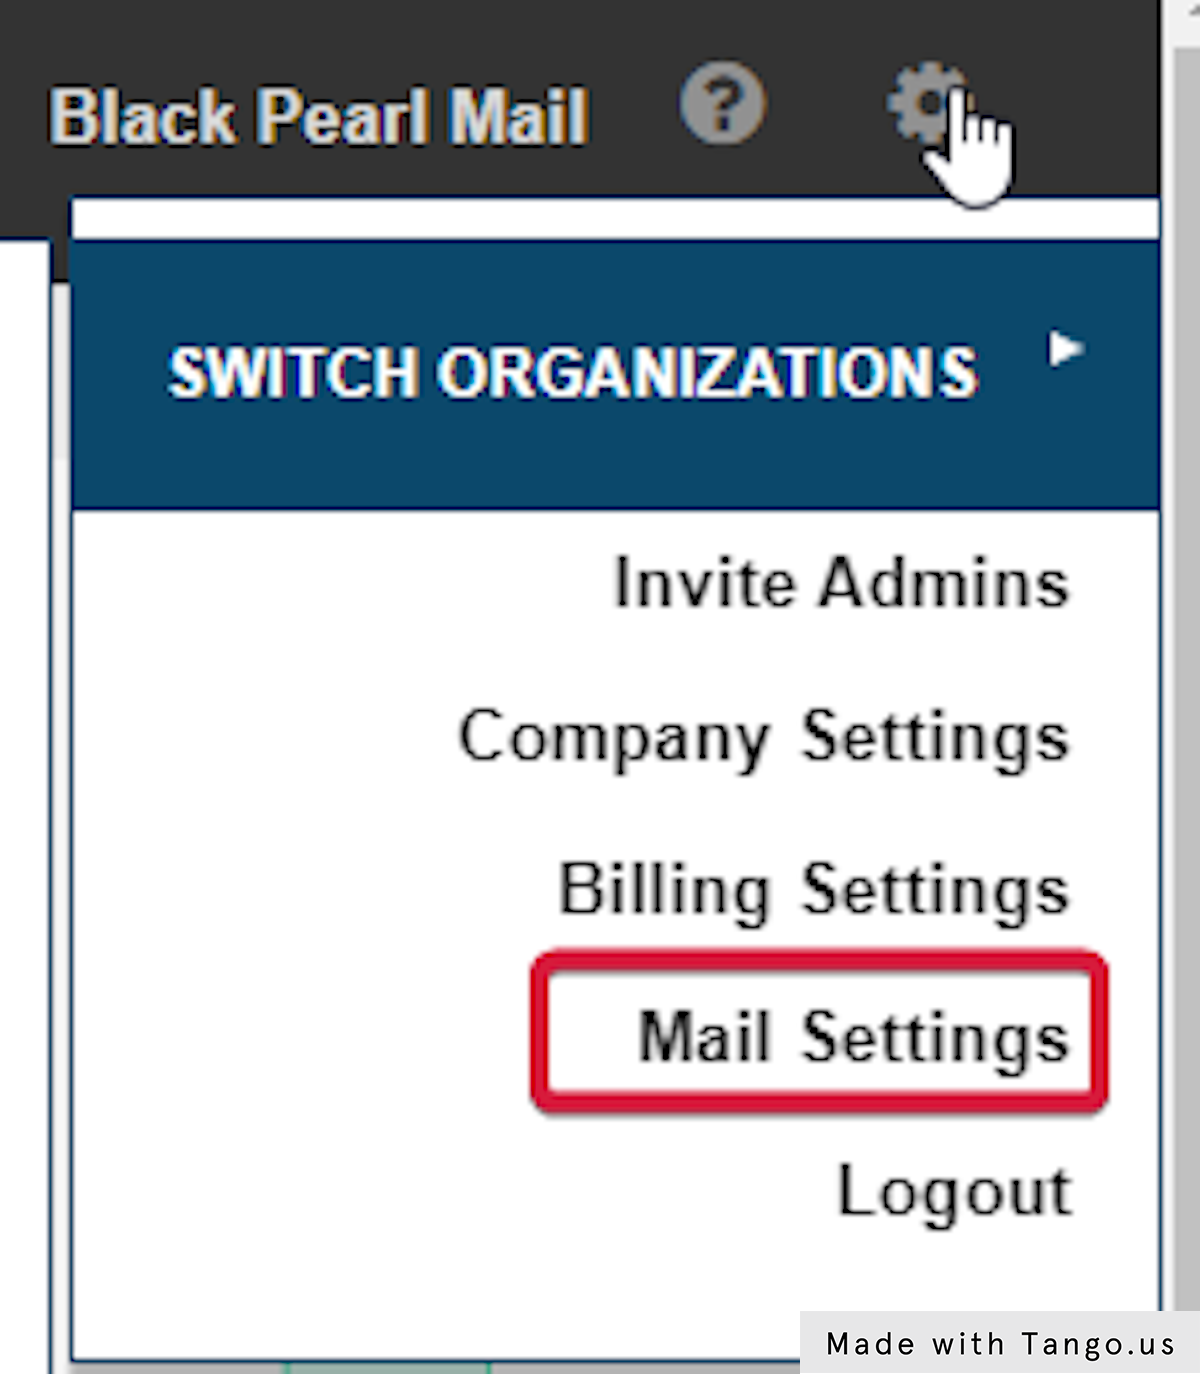 Click on Mail Settings